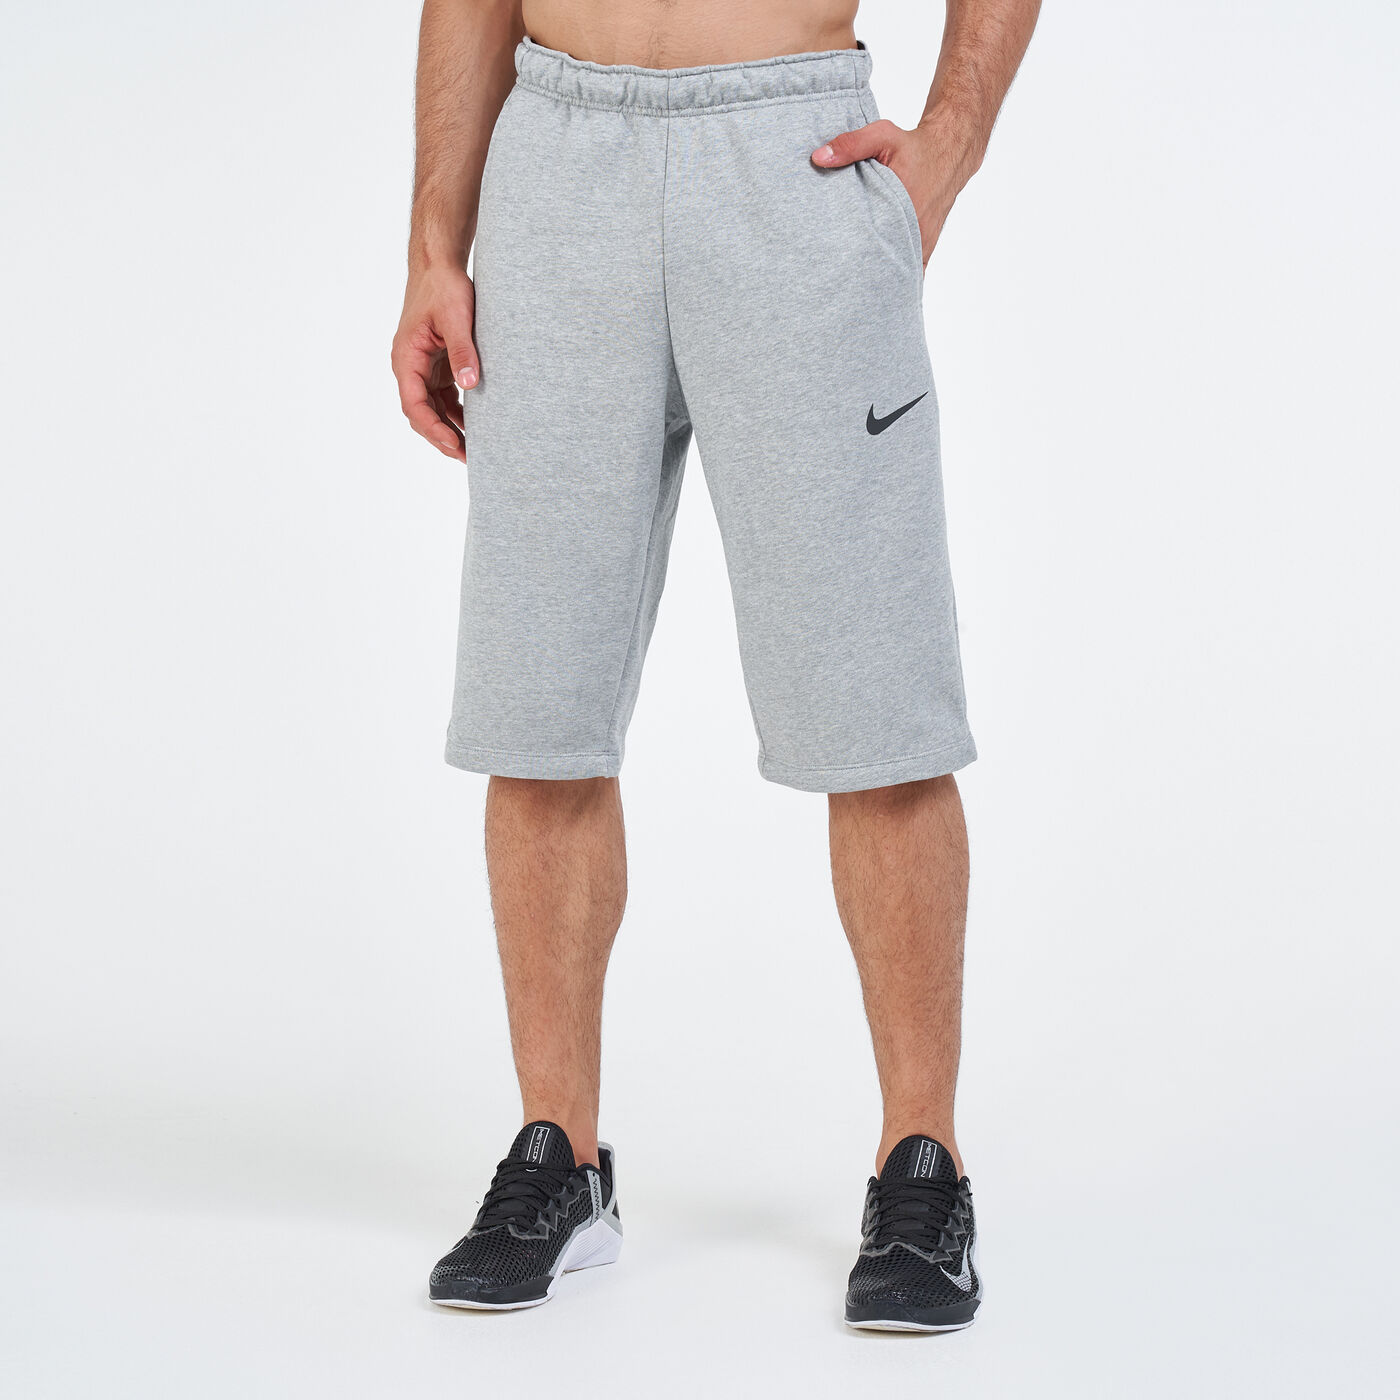 Men's Dri-FIT Over-The-Knee Shorts